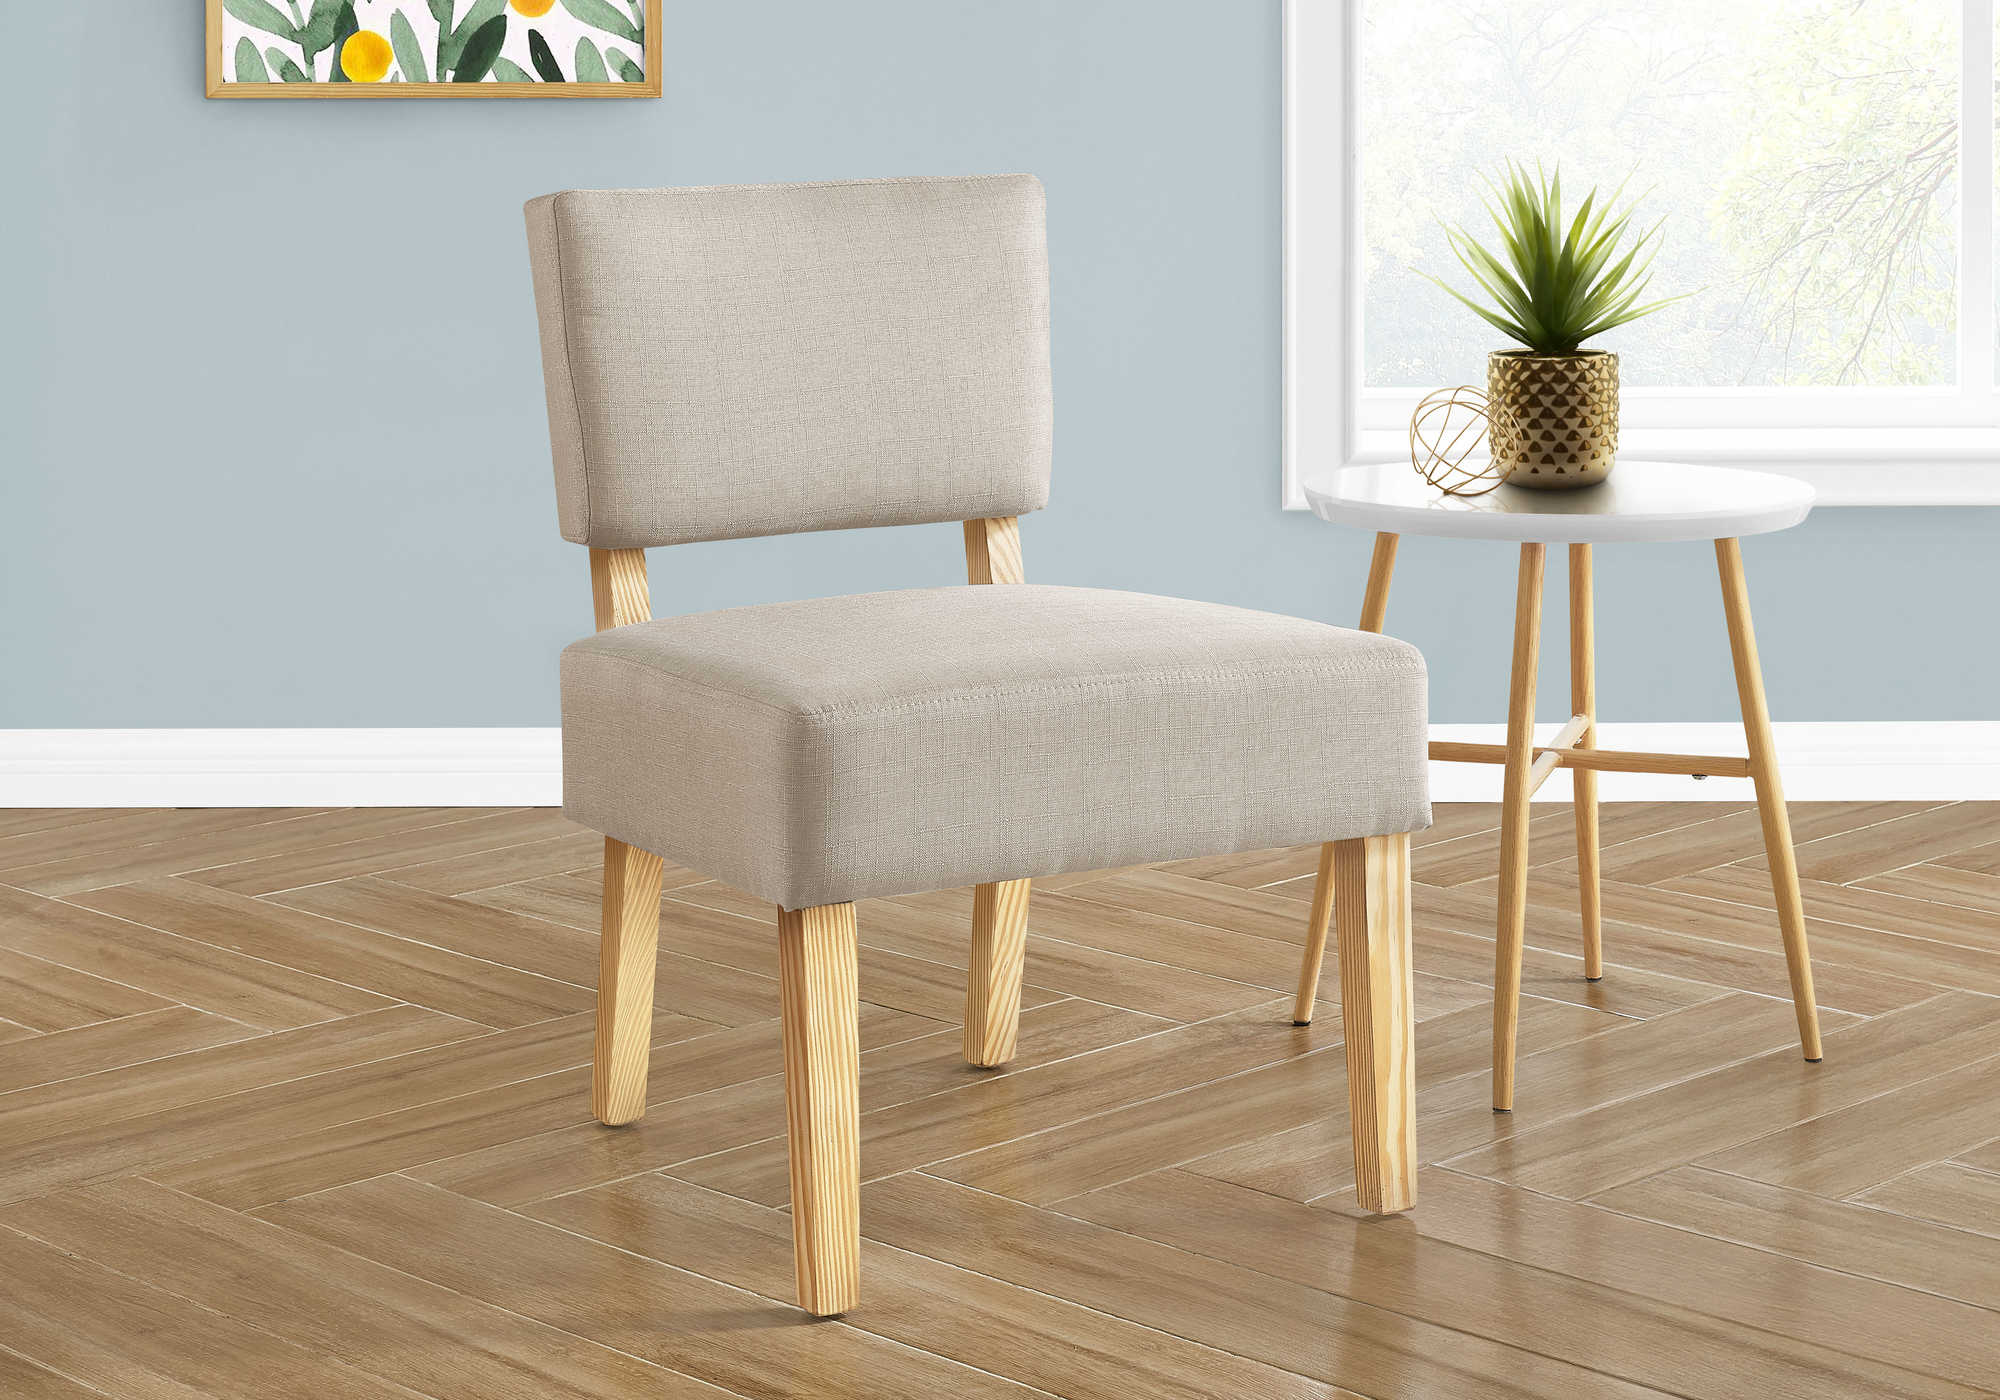 ACCENT CHAIR - TAUPE FABRIC / NATURAL WOOD LEGS